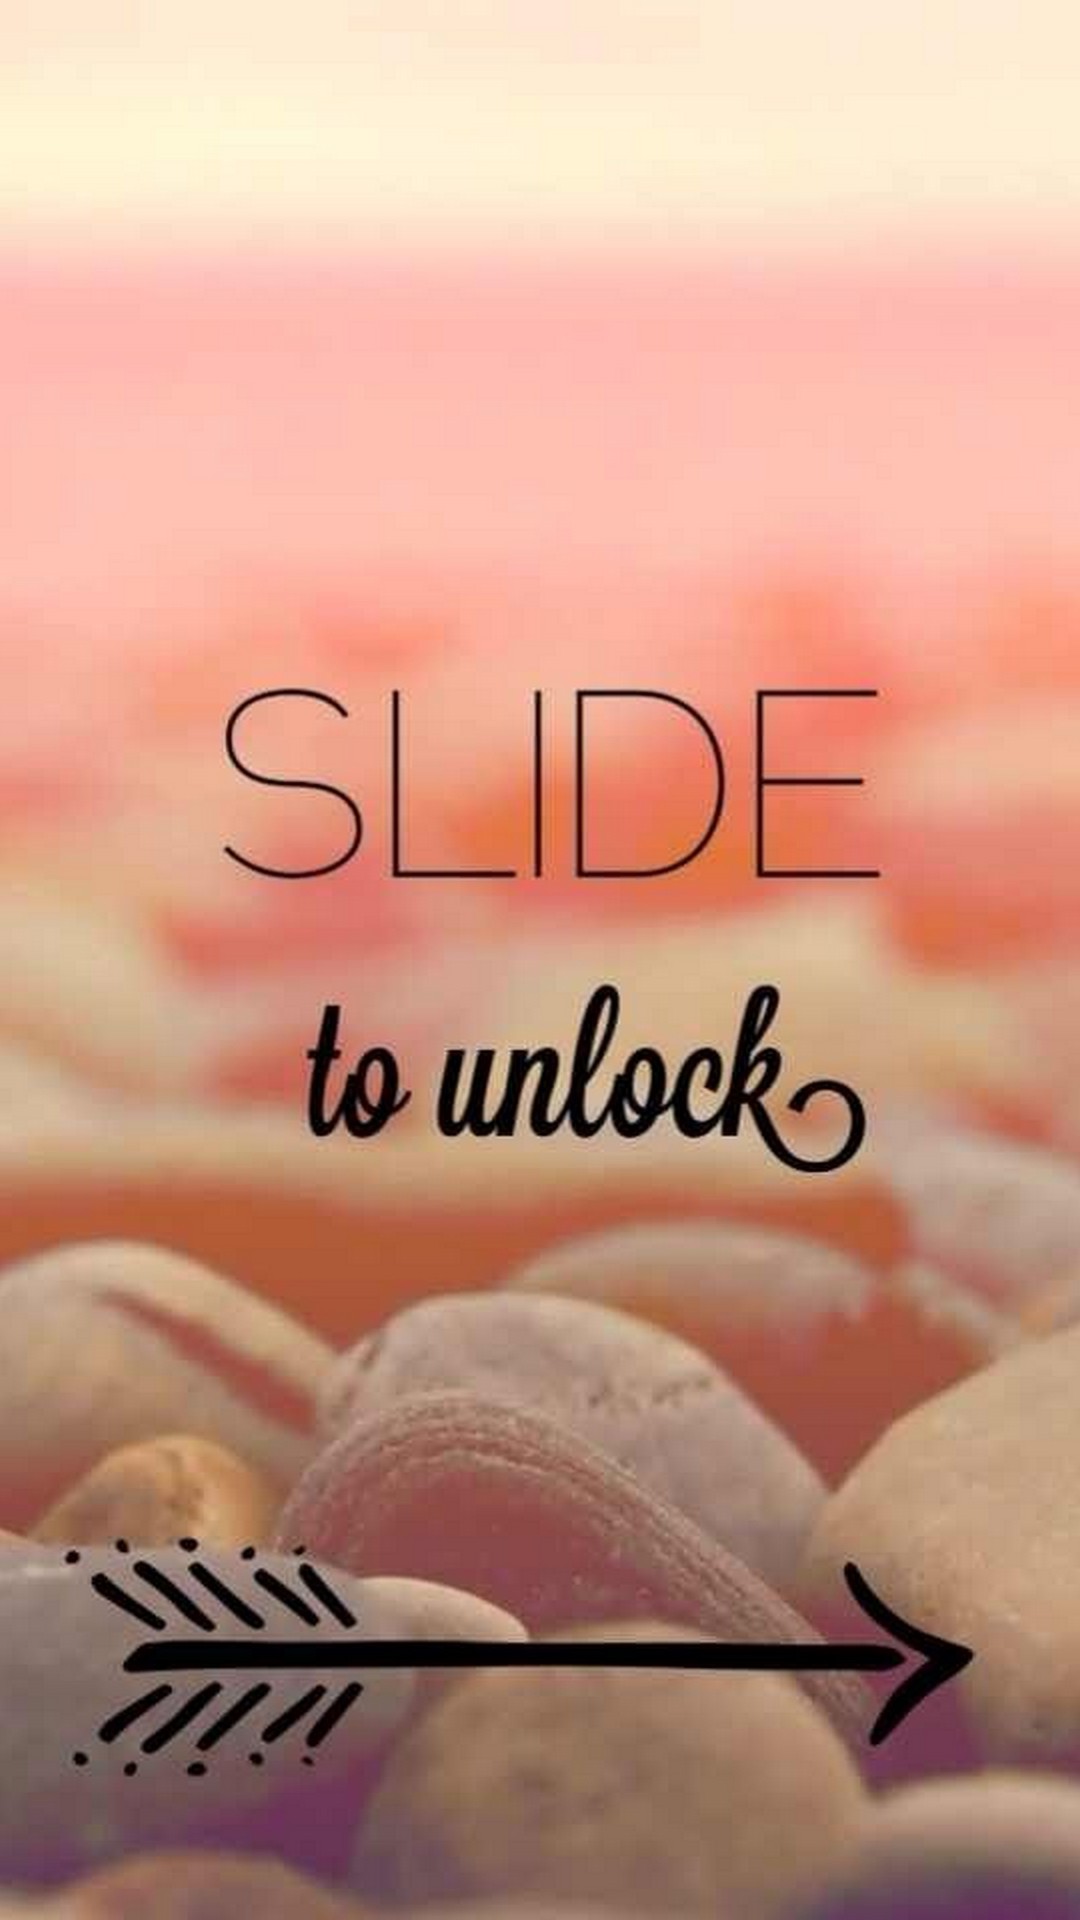 Phones Wallpaper Cute Quotes With High-resolution Pixel - Ipad Is Locked Slide To Unlock - HD Wallpaper 